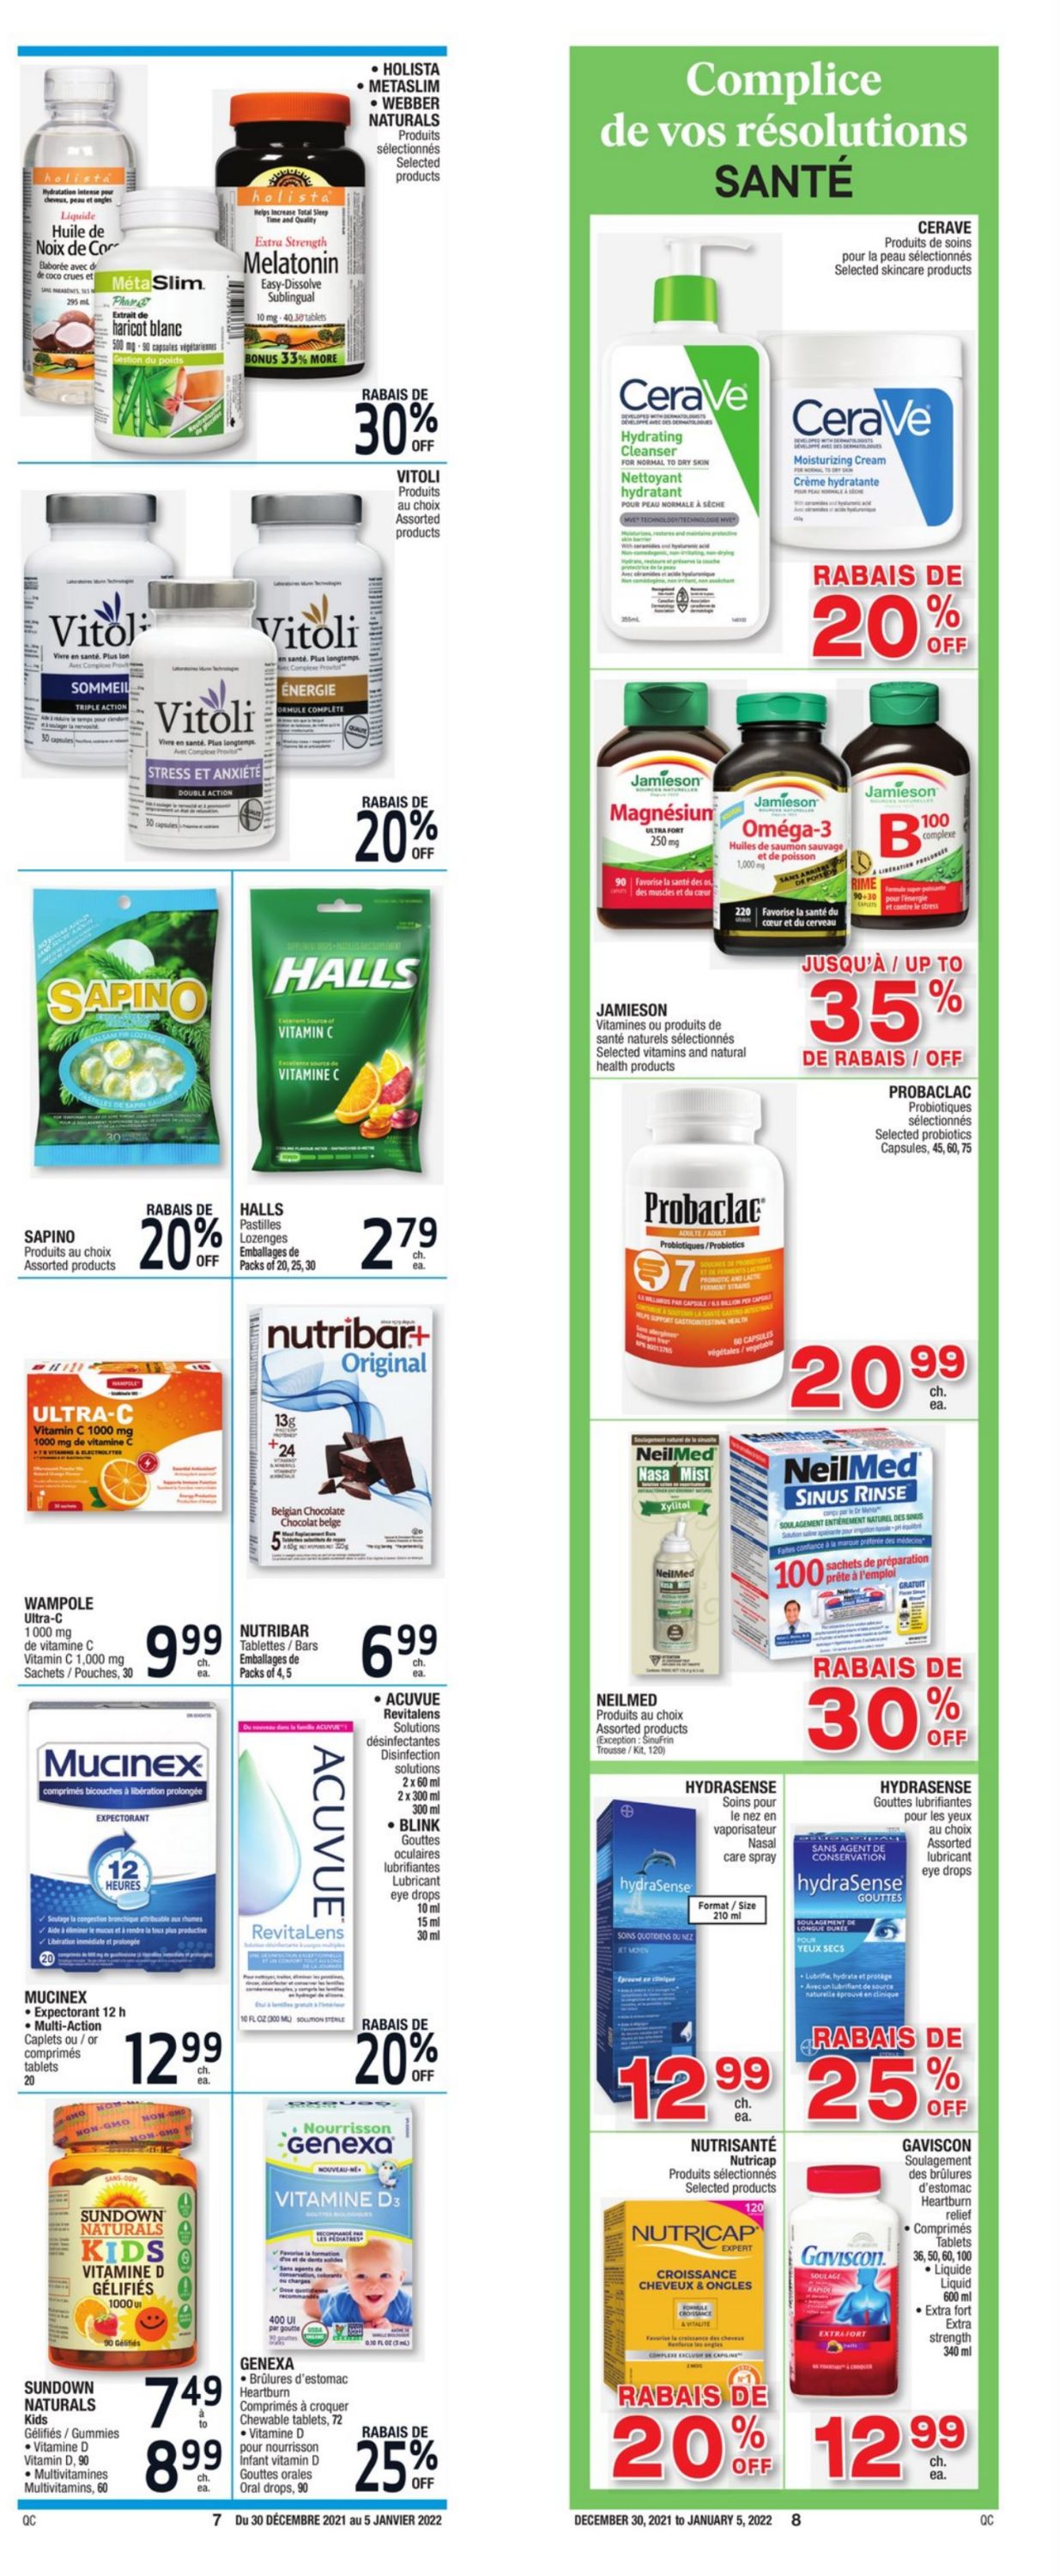 Jean Coutu Flyer - 12/30-01/05/2022 (Page 8)